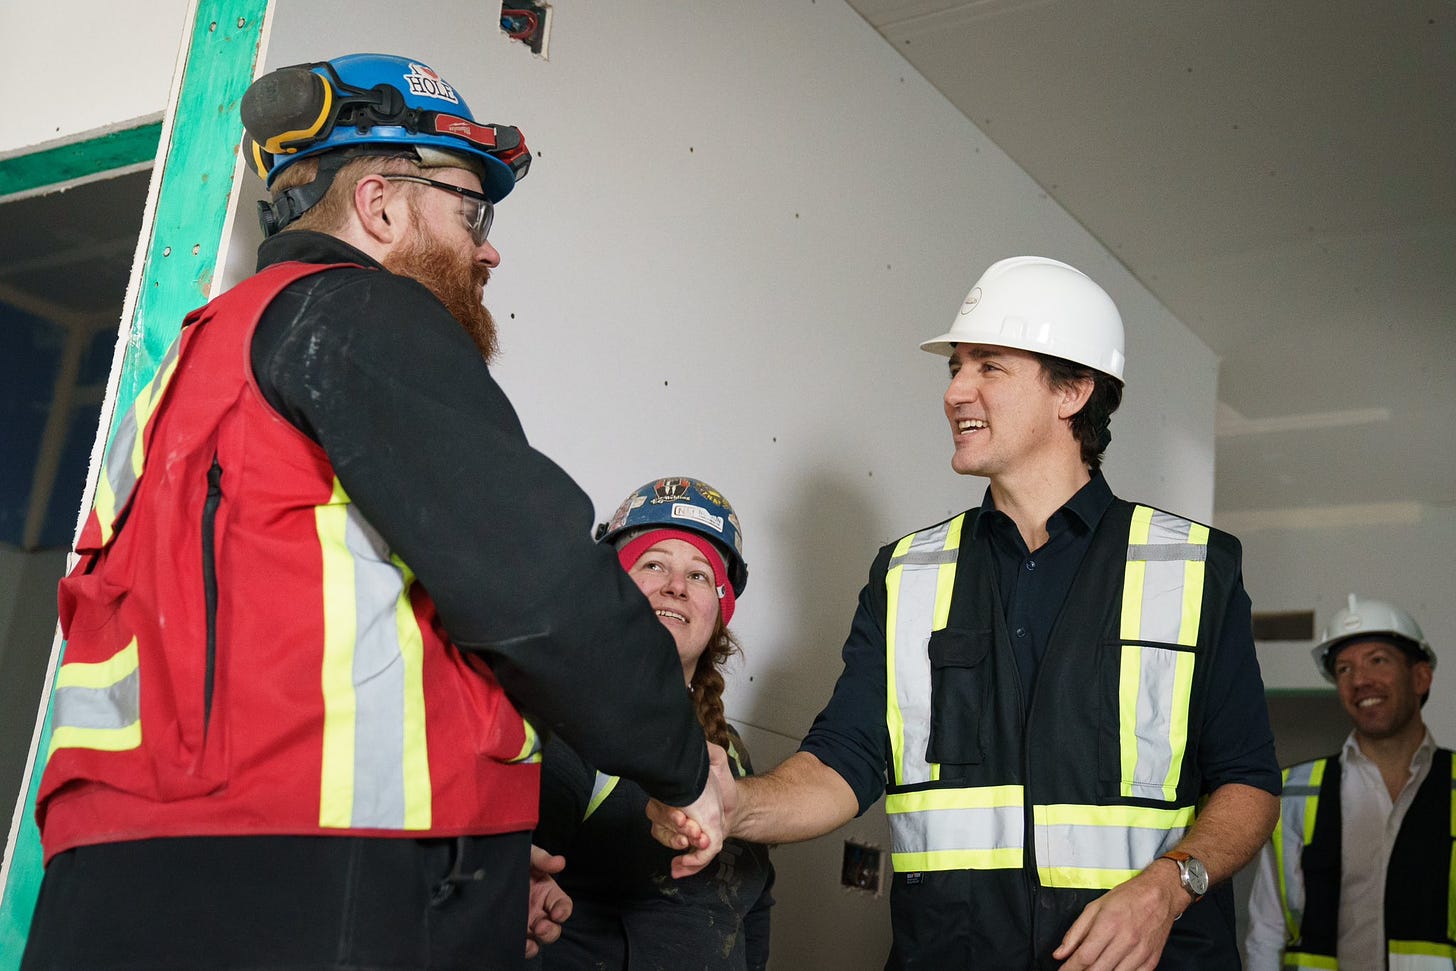 Prime Minister Justin Trudeau is standing and shaking hands with a man, who is standing in front of him. A woman and man are standing behind them. Everyone is wearing safety vests and hard hats, and is smiling.